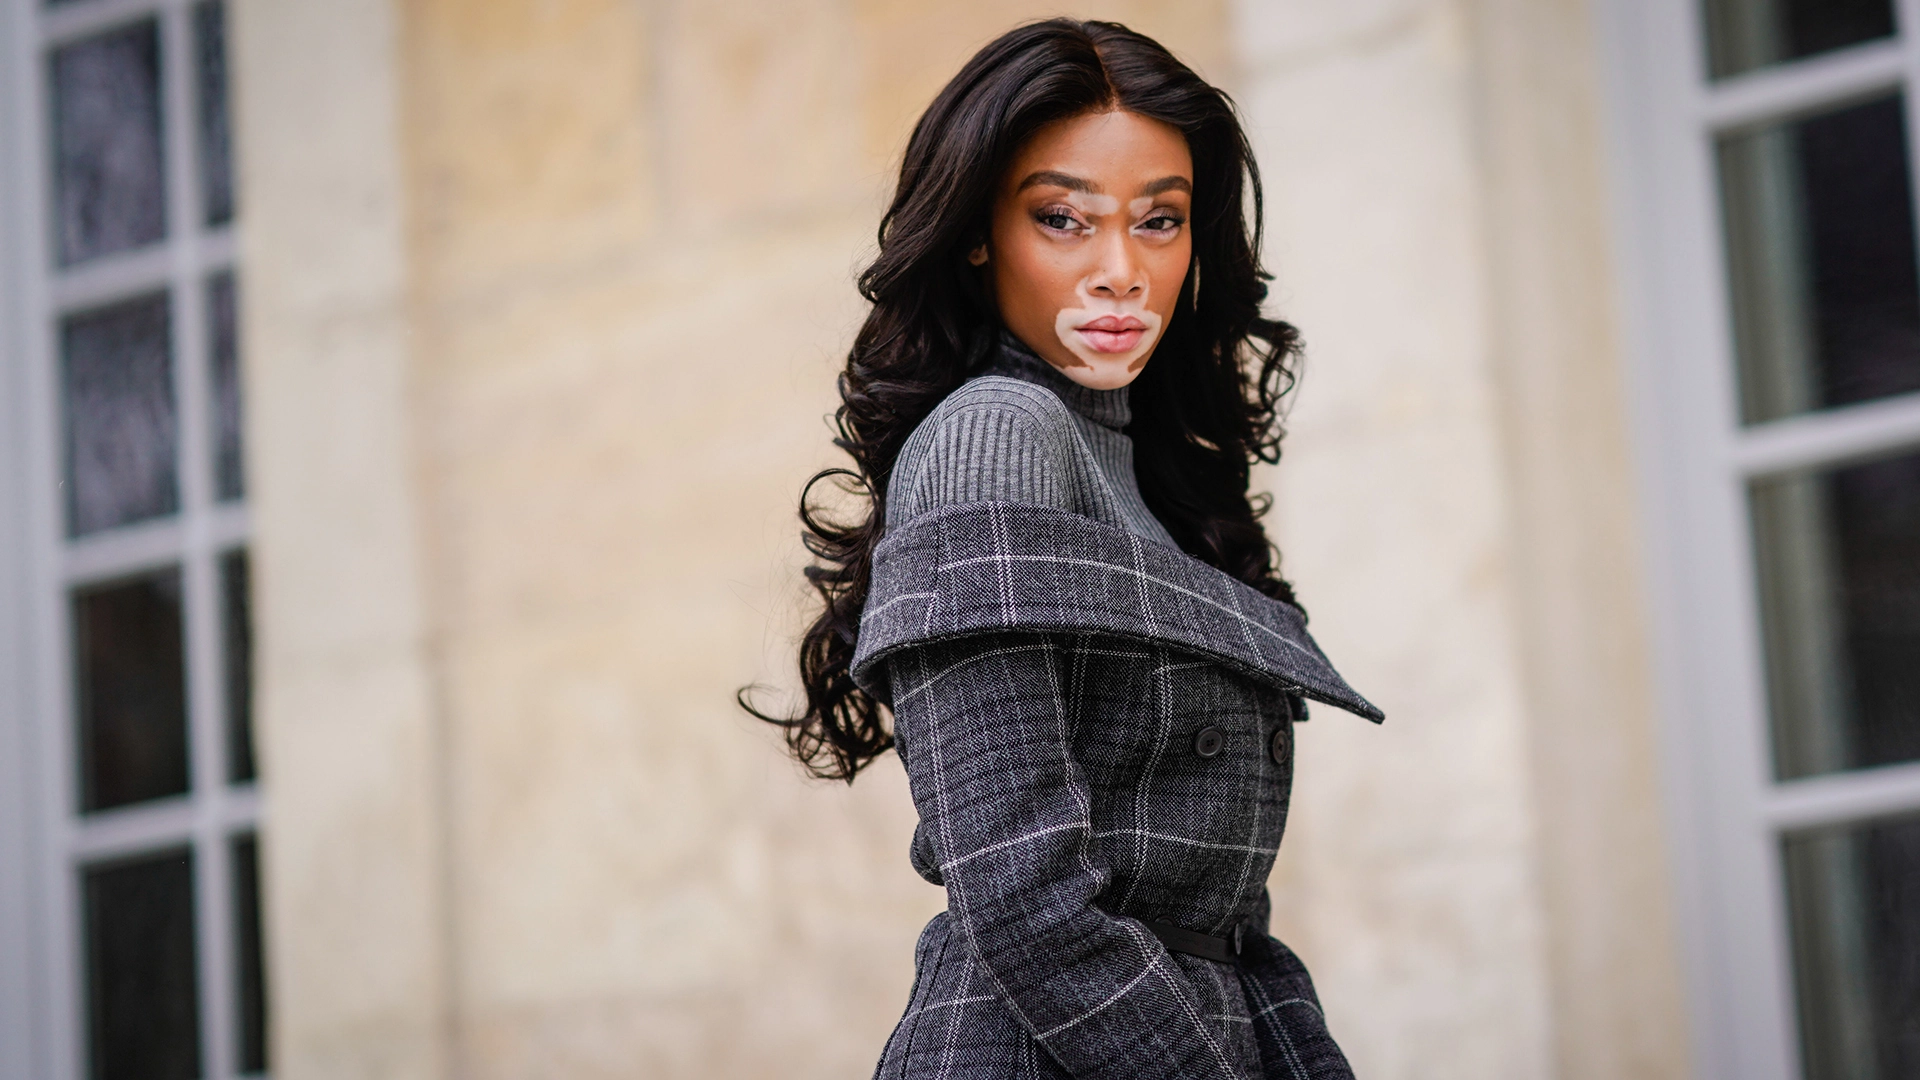 Who Is Winnie Harlow Dating?